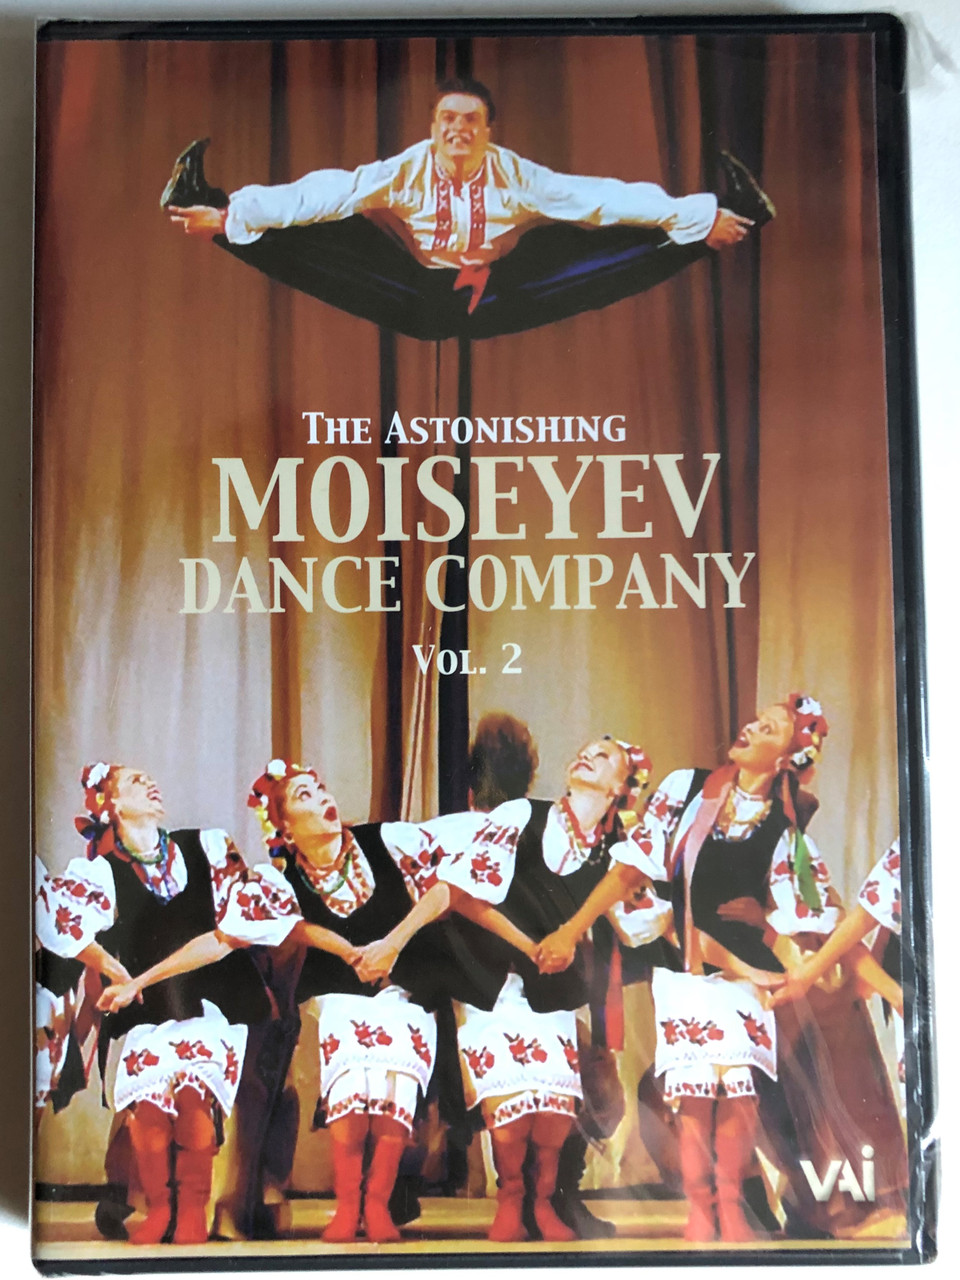 The_Astonishing_Moiseyev_Dance_Company_2_Live_performances_uness_otherwise_noted_Tchaikovsky_Concert_Hall_Moscow_19881975_PACKAGING_DESIGN_AND_DVD_AUTHORING_2008_VIDEO_A___78314.1691898787.1280.1280.JPG (960×1280)